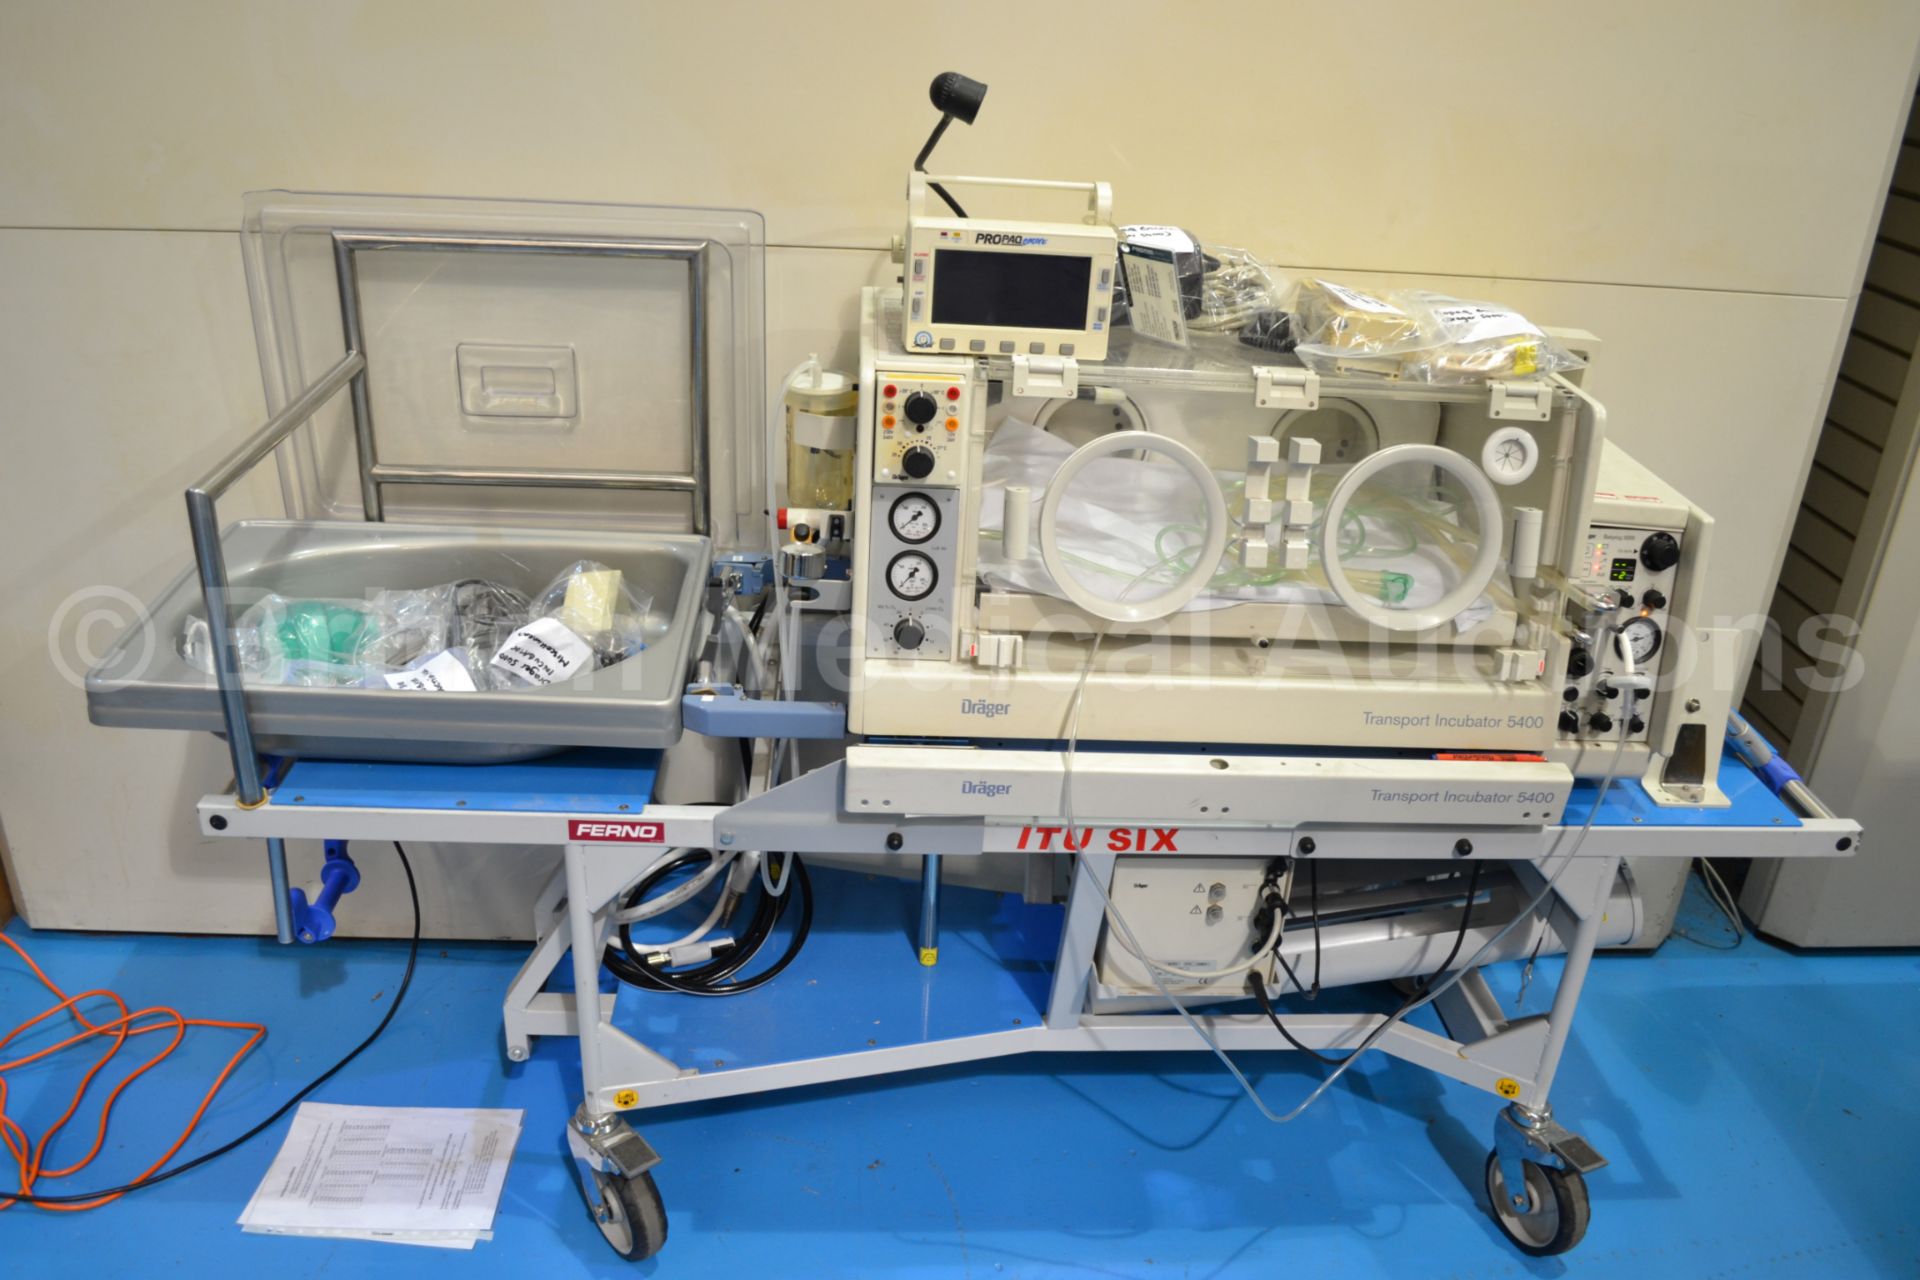 Drager Transport Incubator 5400 with Hoses, Drager - Image 2 of 7